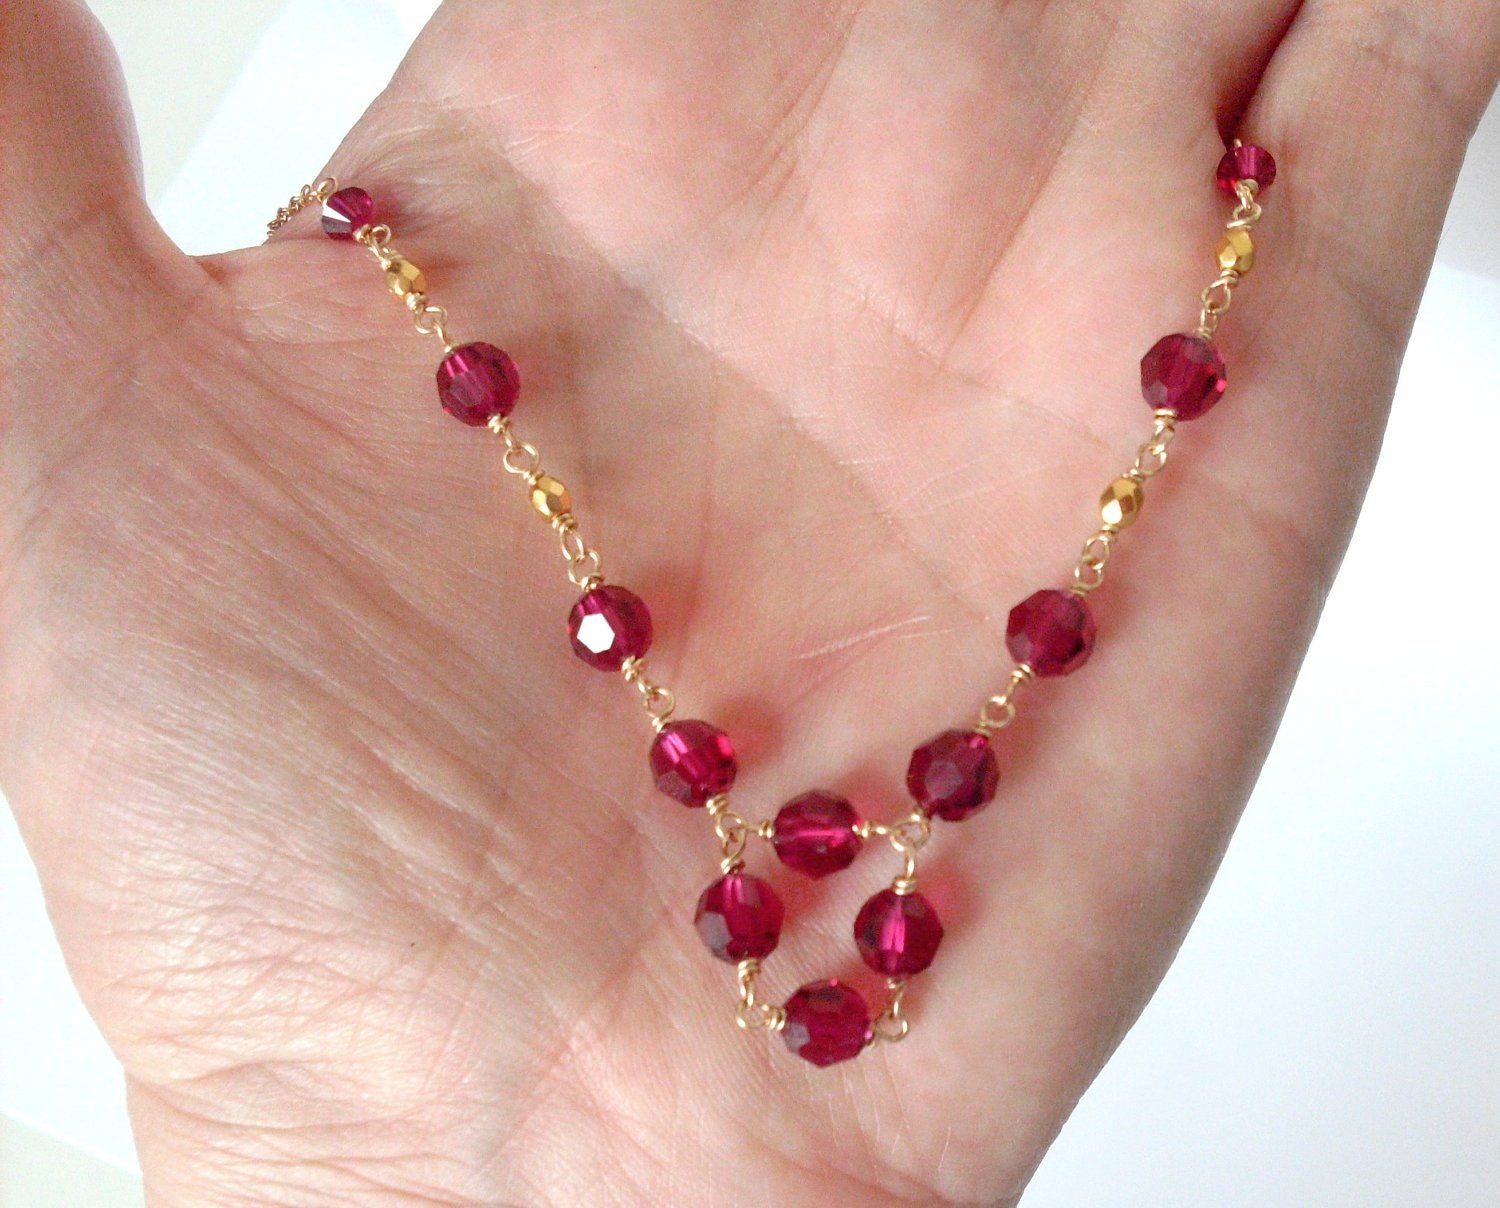 Red Crystal Necklace, Ruby Color Bead Link Necklace, 14K Gold Fill Delicate Chain, Swarovski Crystal, Red and Gold Formal Crystal Jewelry